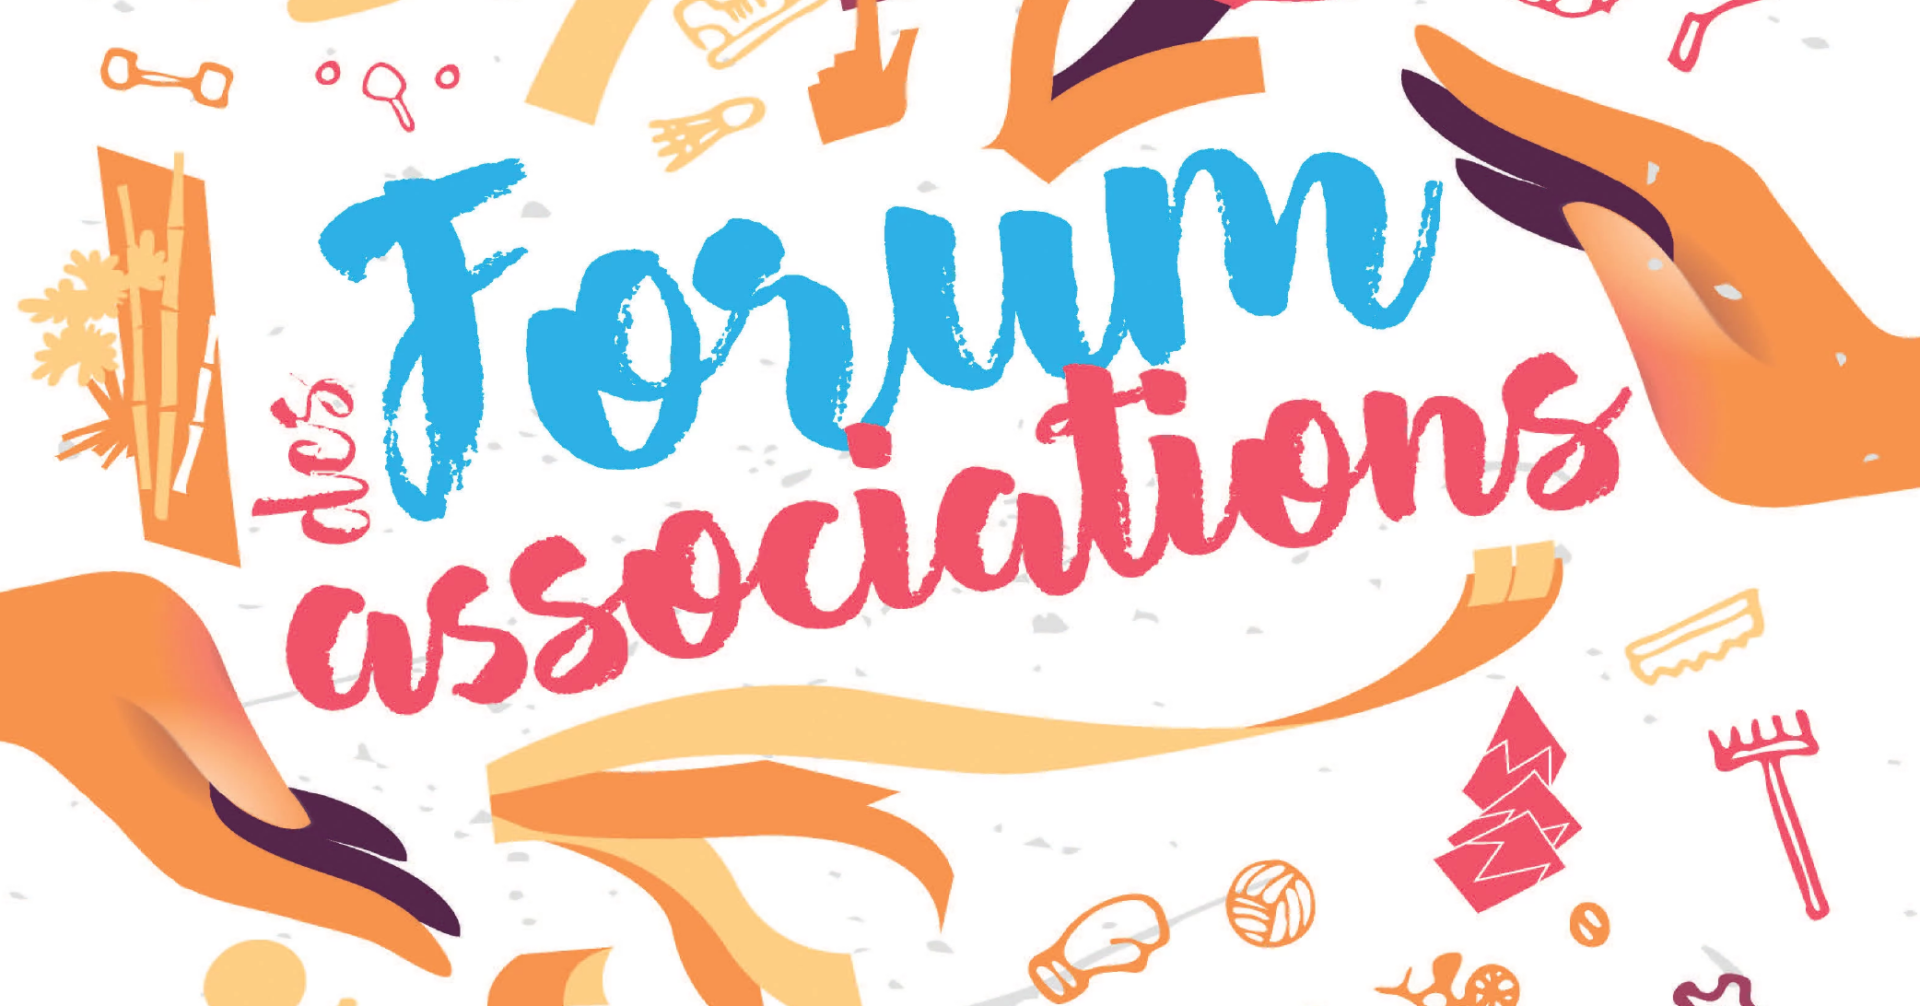 You are currently viewing Forum des associations